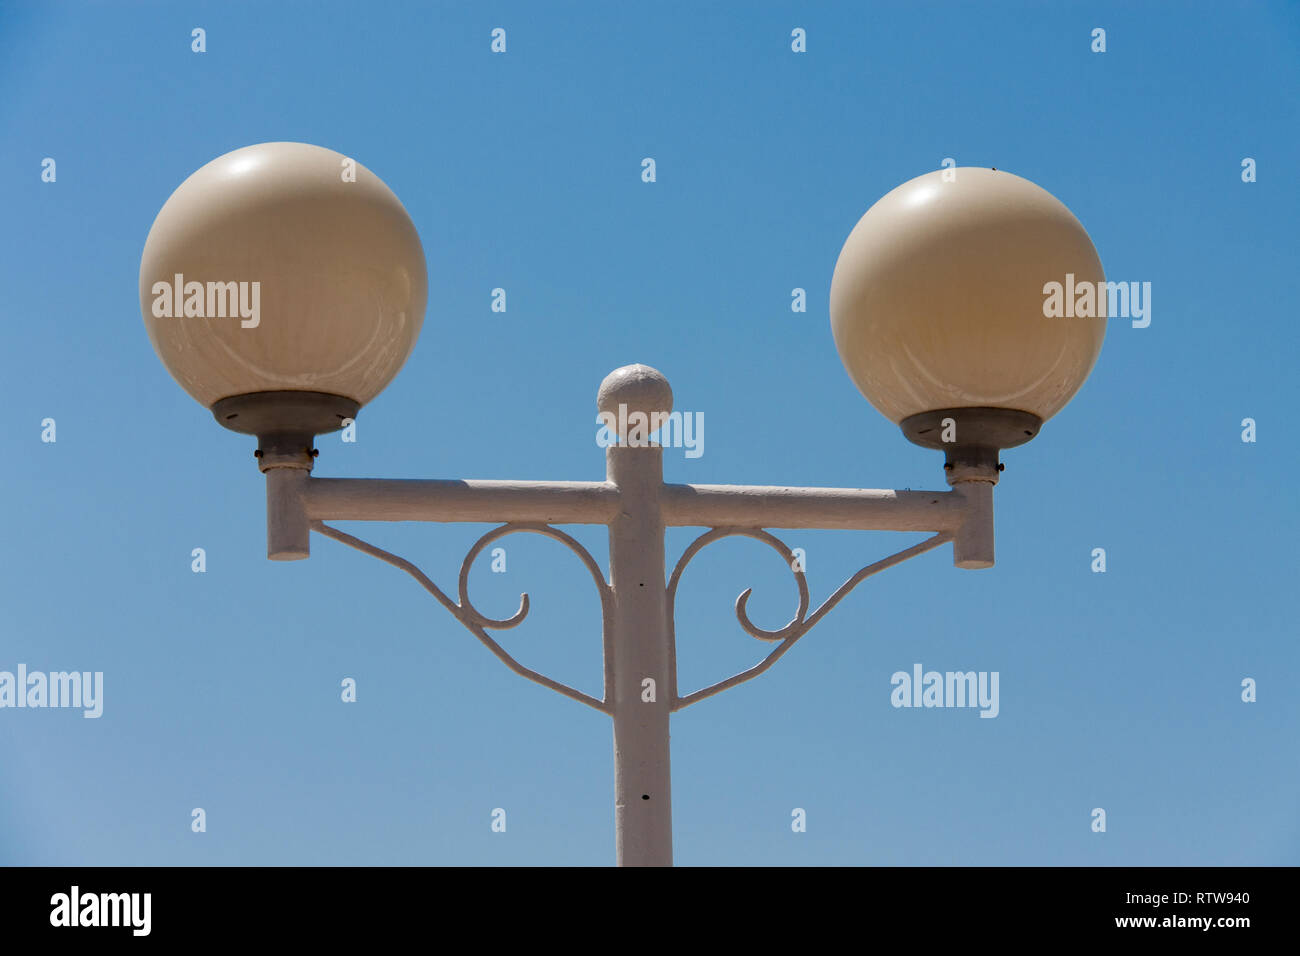 Premium Photo  Lighting ground street lamp in the shape of a ball